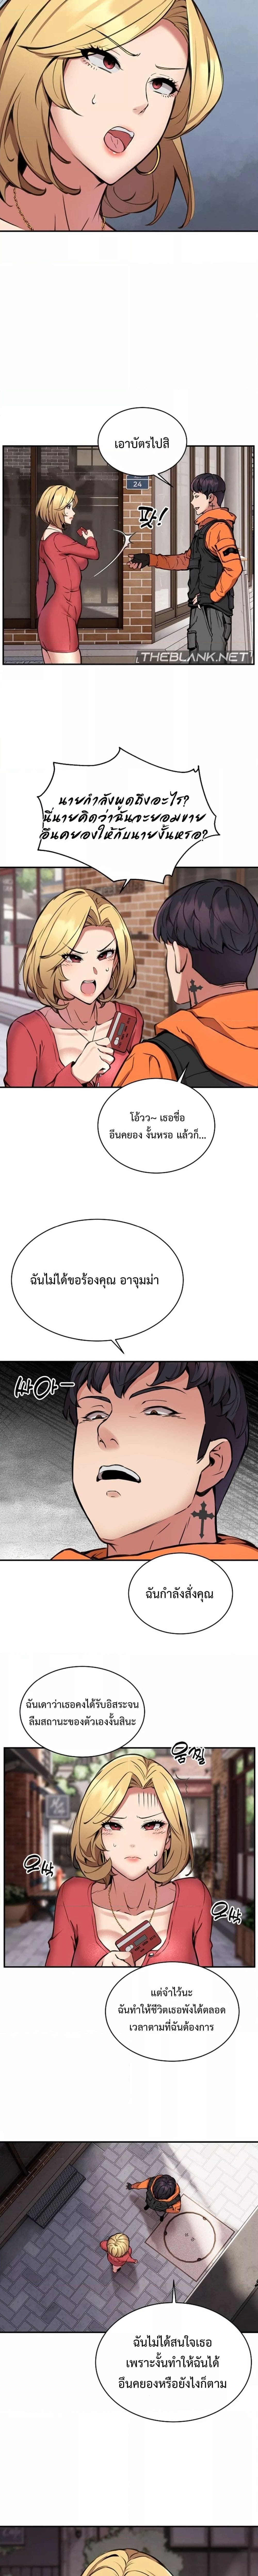 Driver in the New City ตอนที่ 8 ภาพ 5